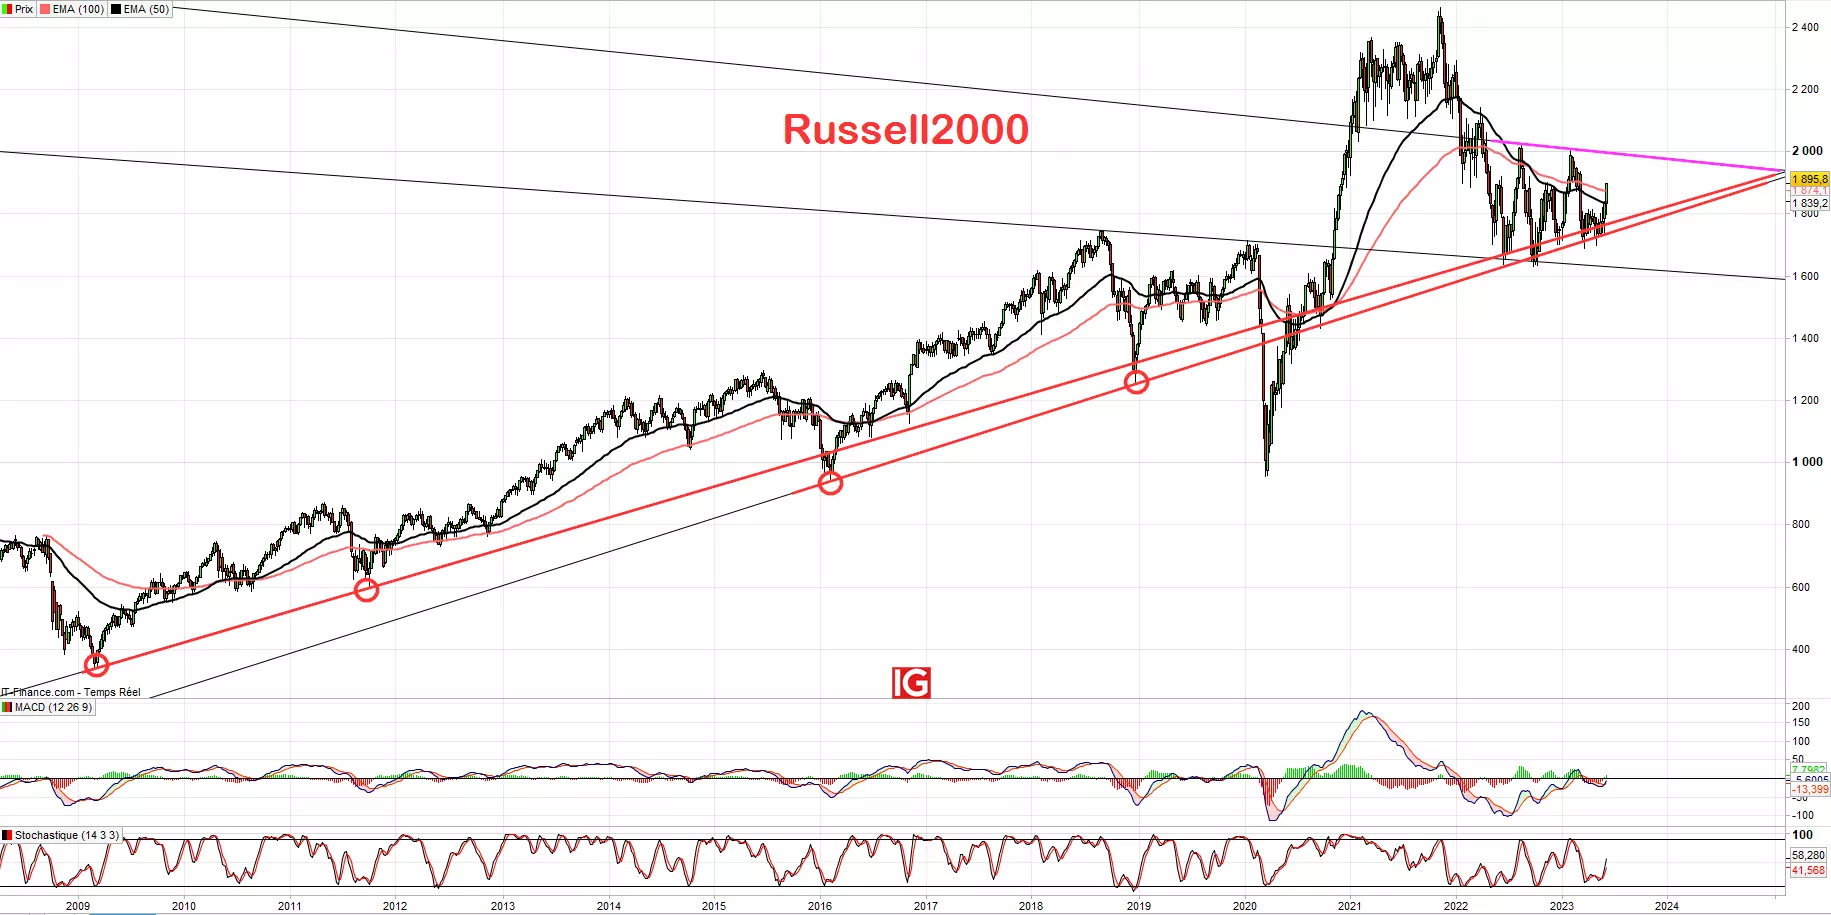 Analyse technique du russell 2000